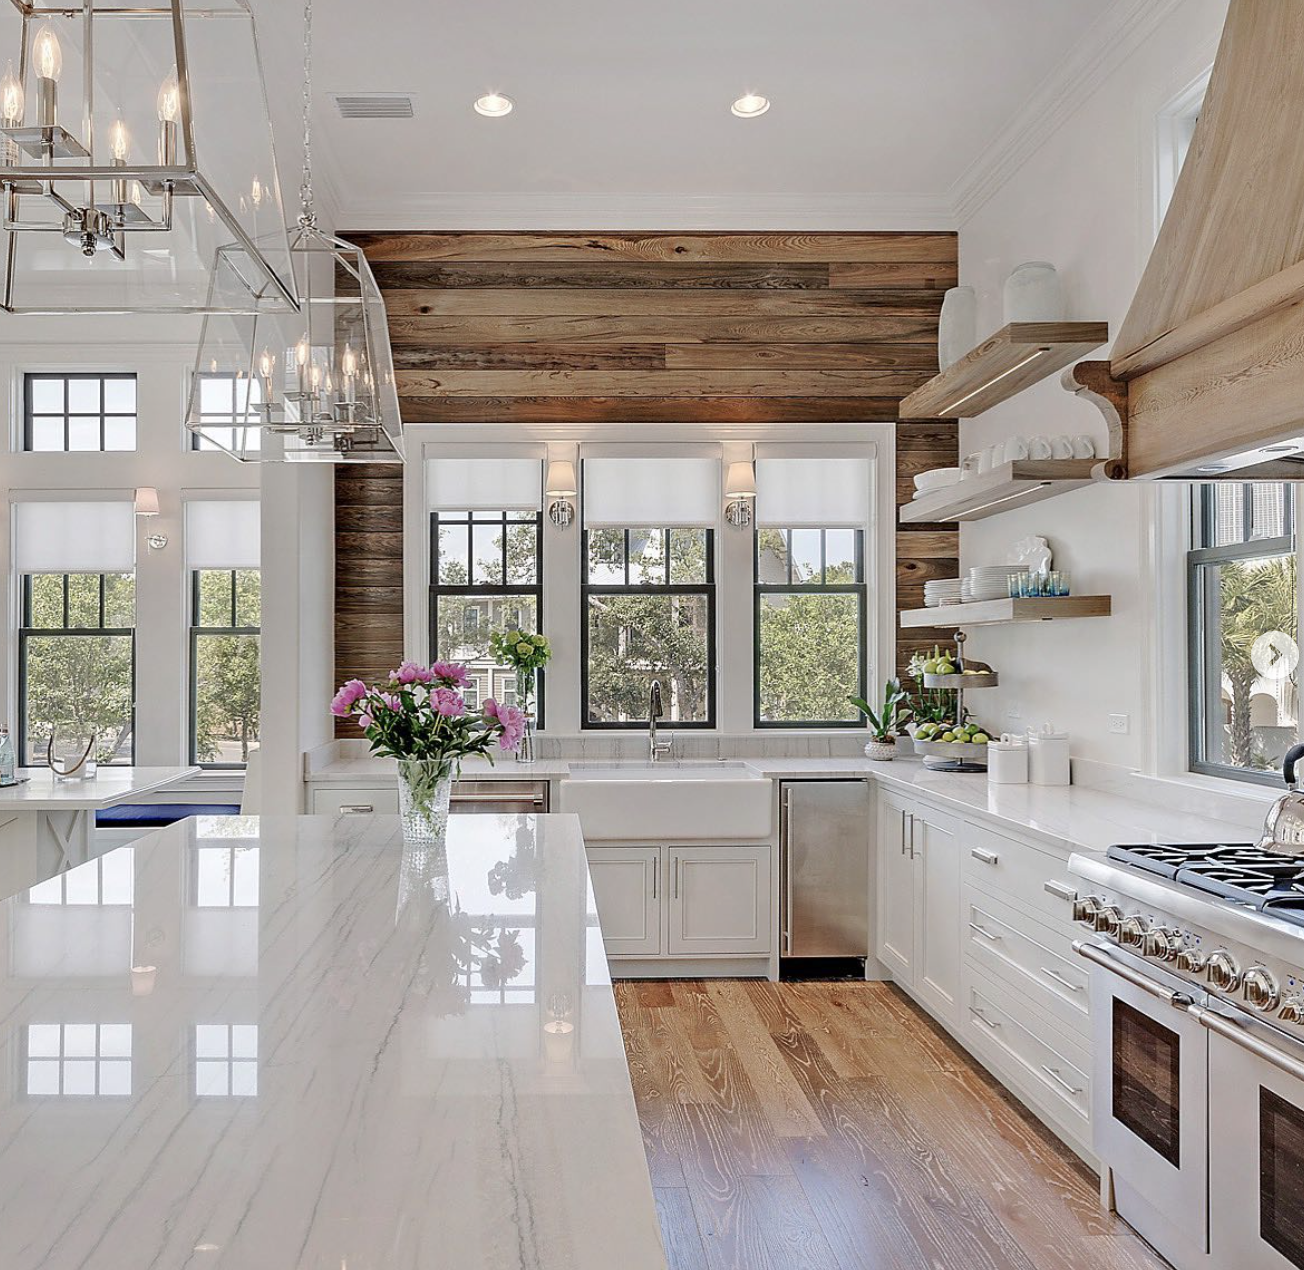 Farmhouse Kitchen Ideas for a Perfectly Rustic Look